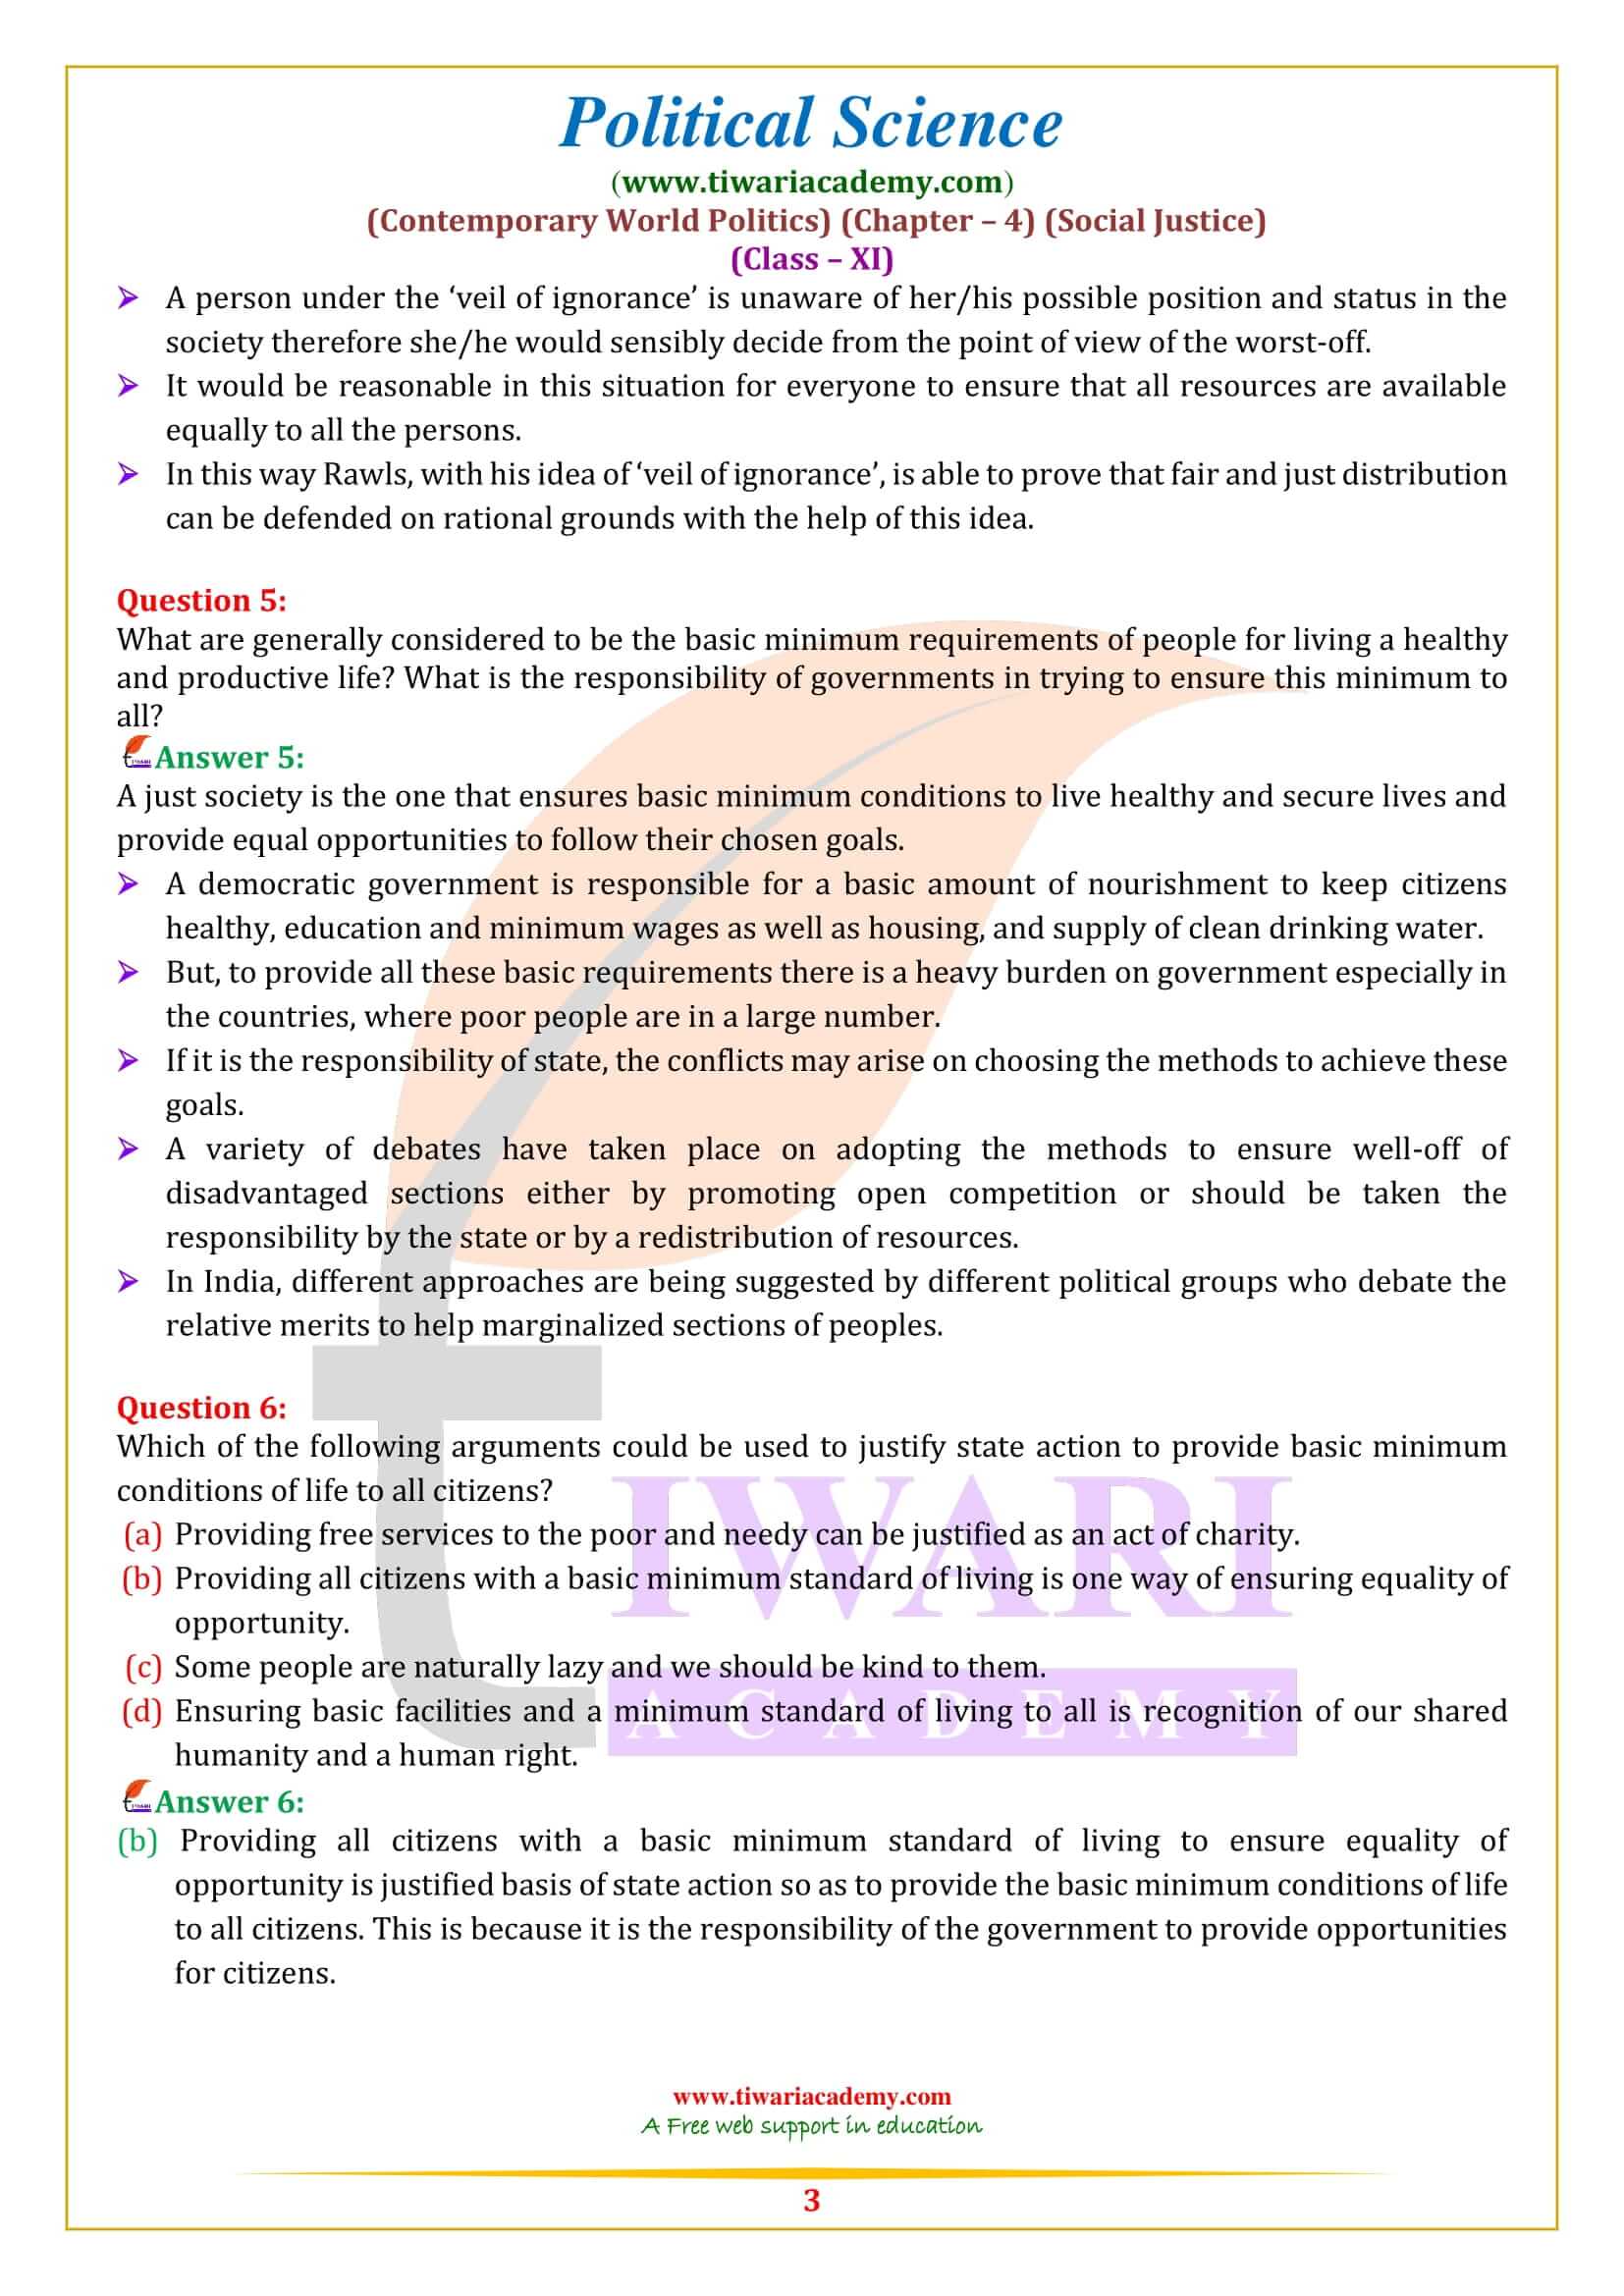 NCERT Solutions for Class 11 Political Science Chapter 4 in English Medium